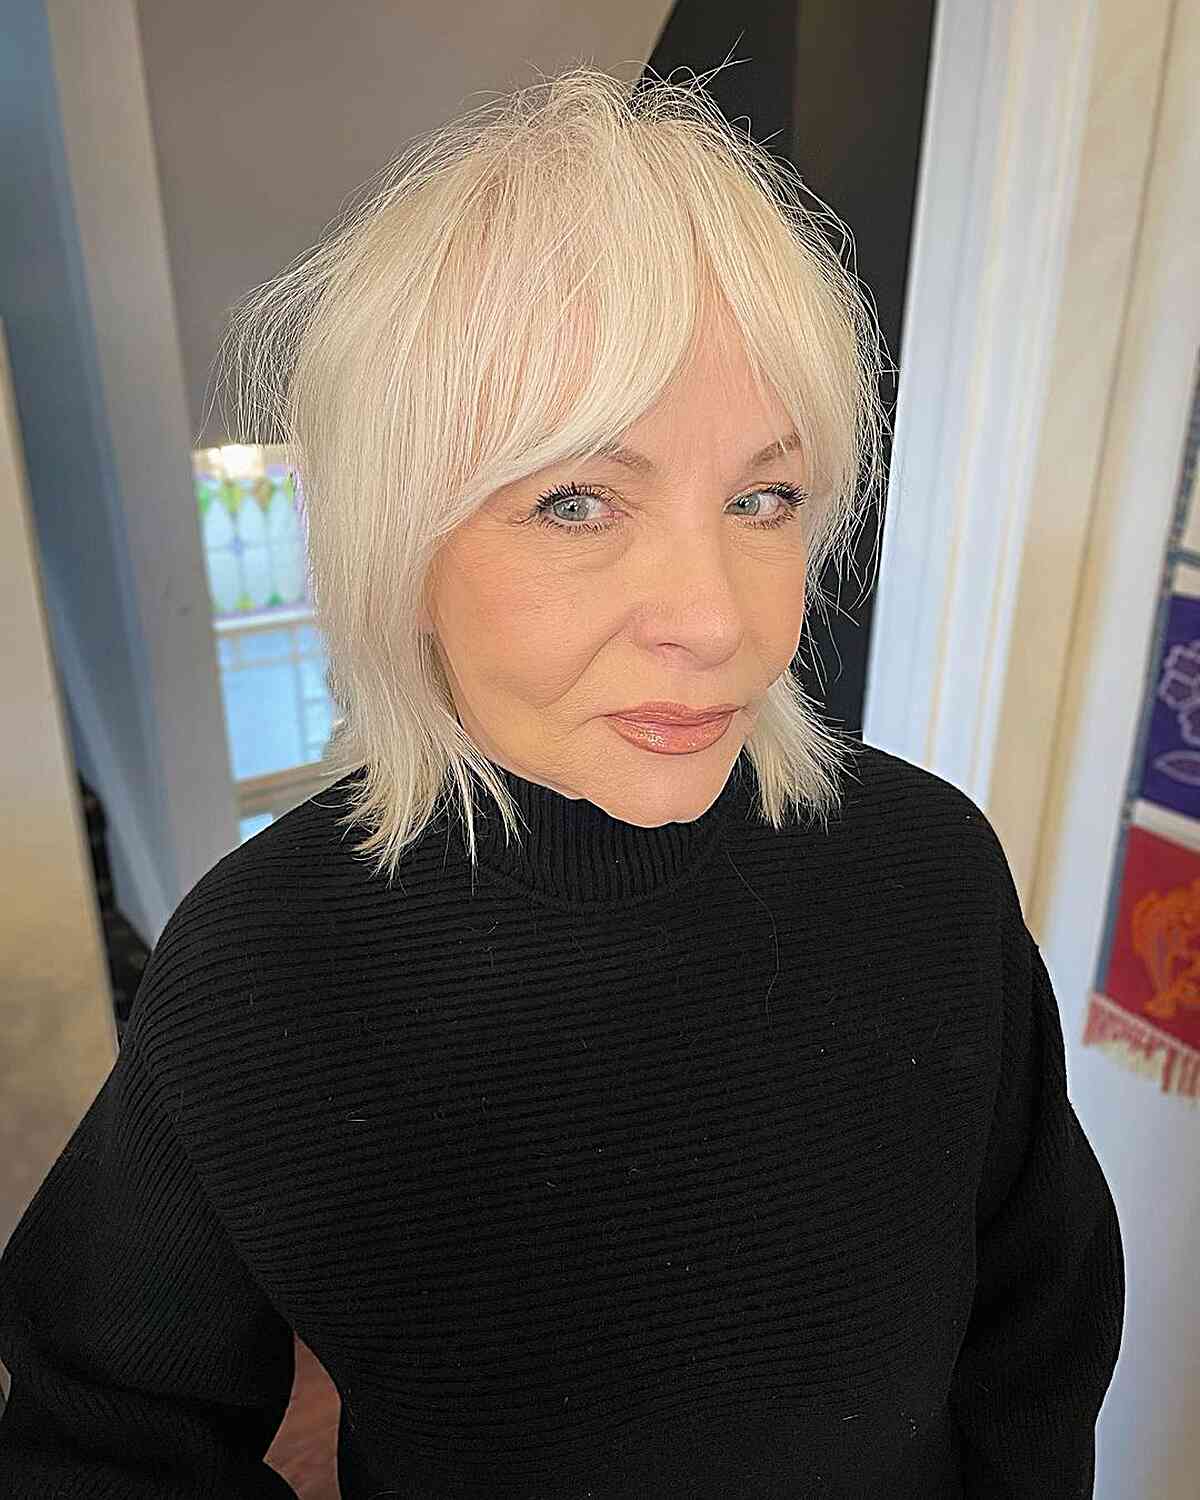 Creamy White Blonde Short Hair for Older Ladies with Gray Hair